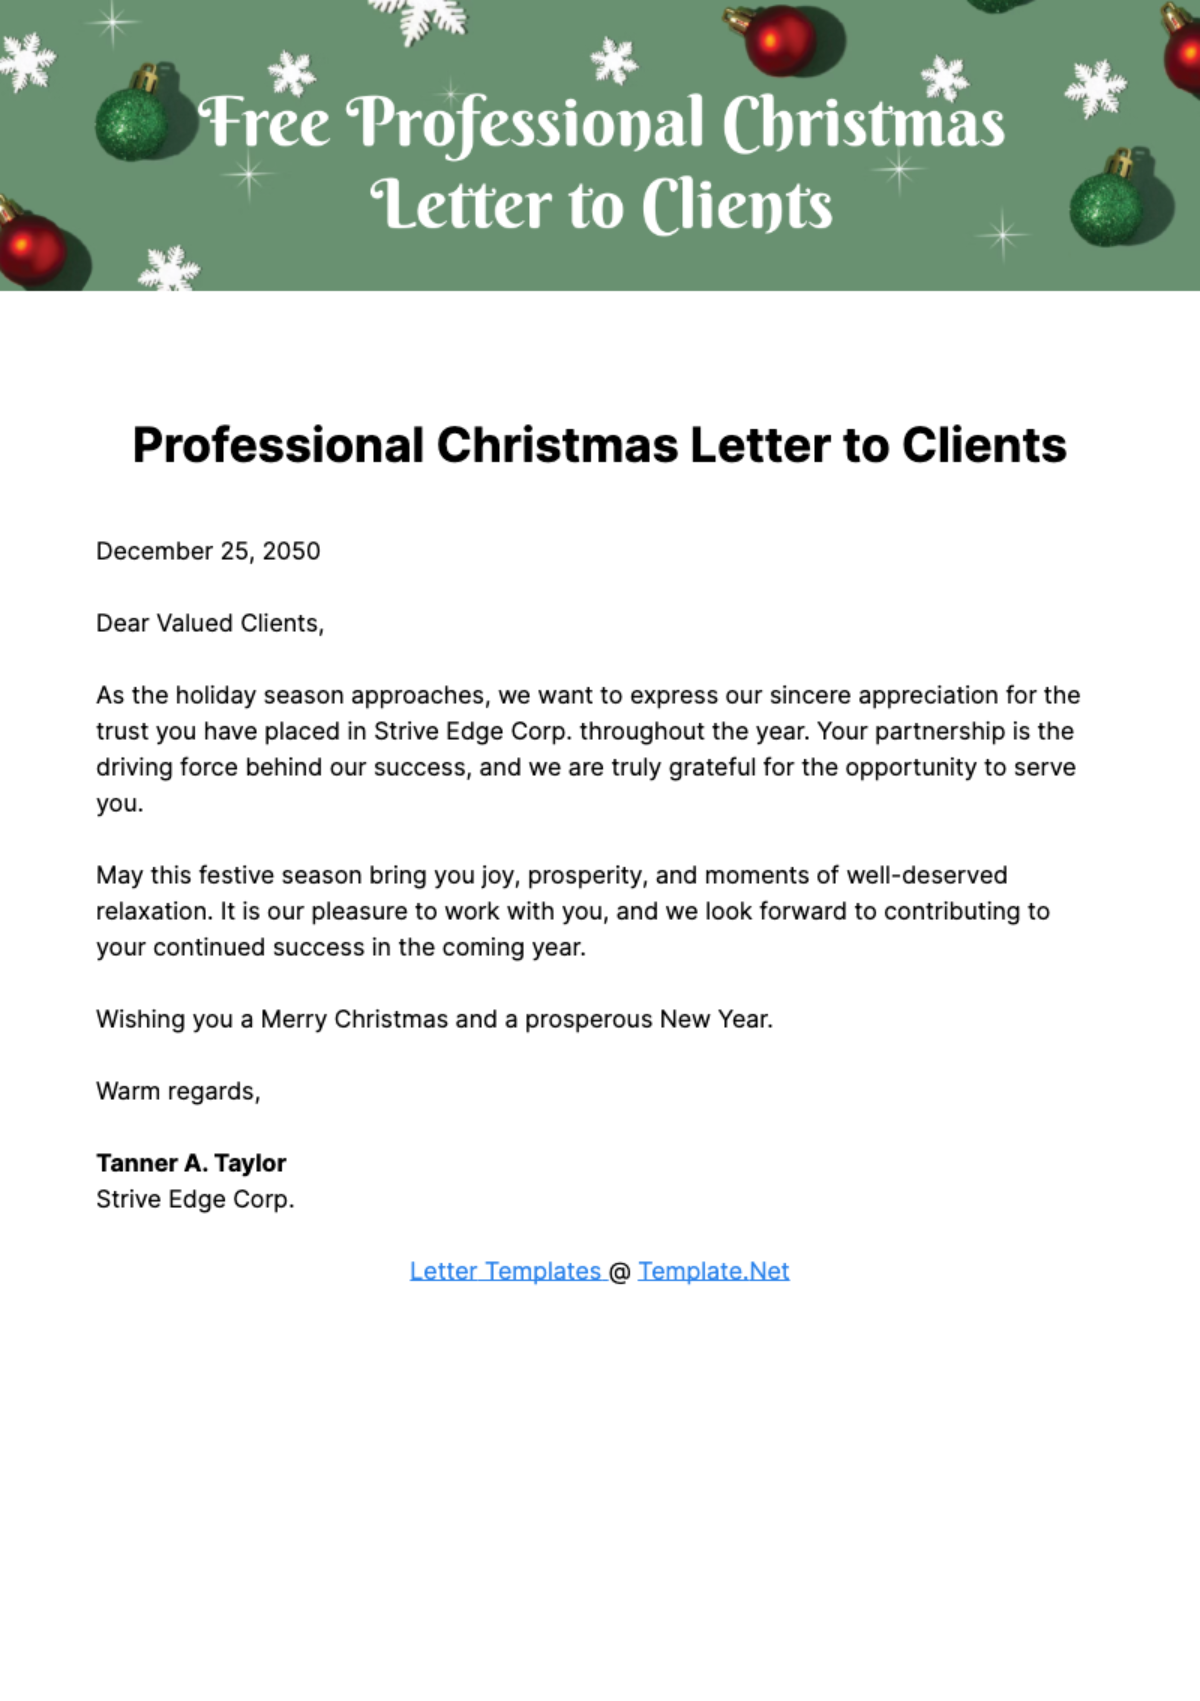 Free Professional Christmas Letter to Clients Template